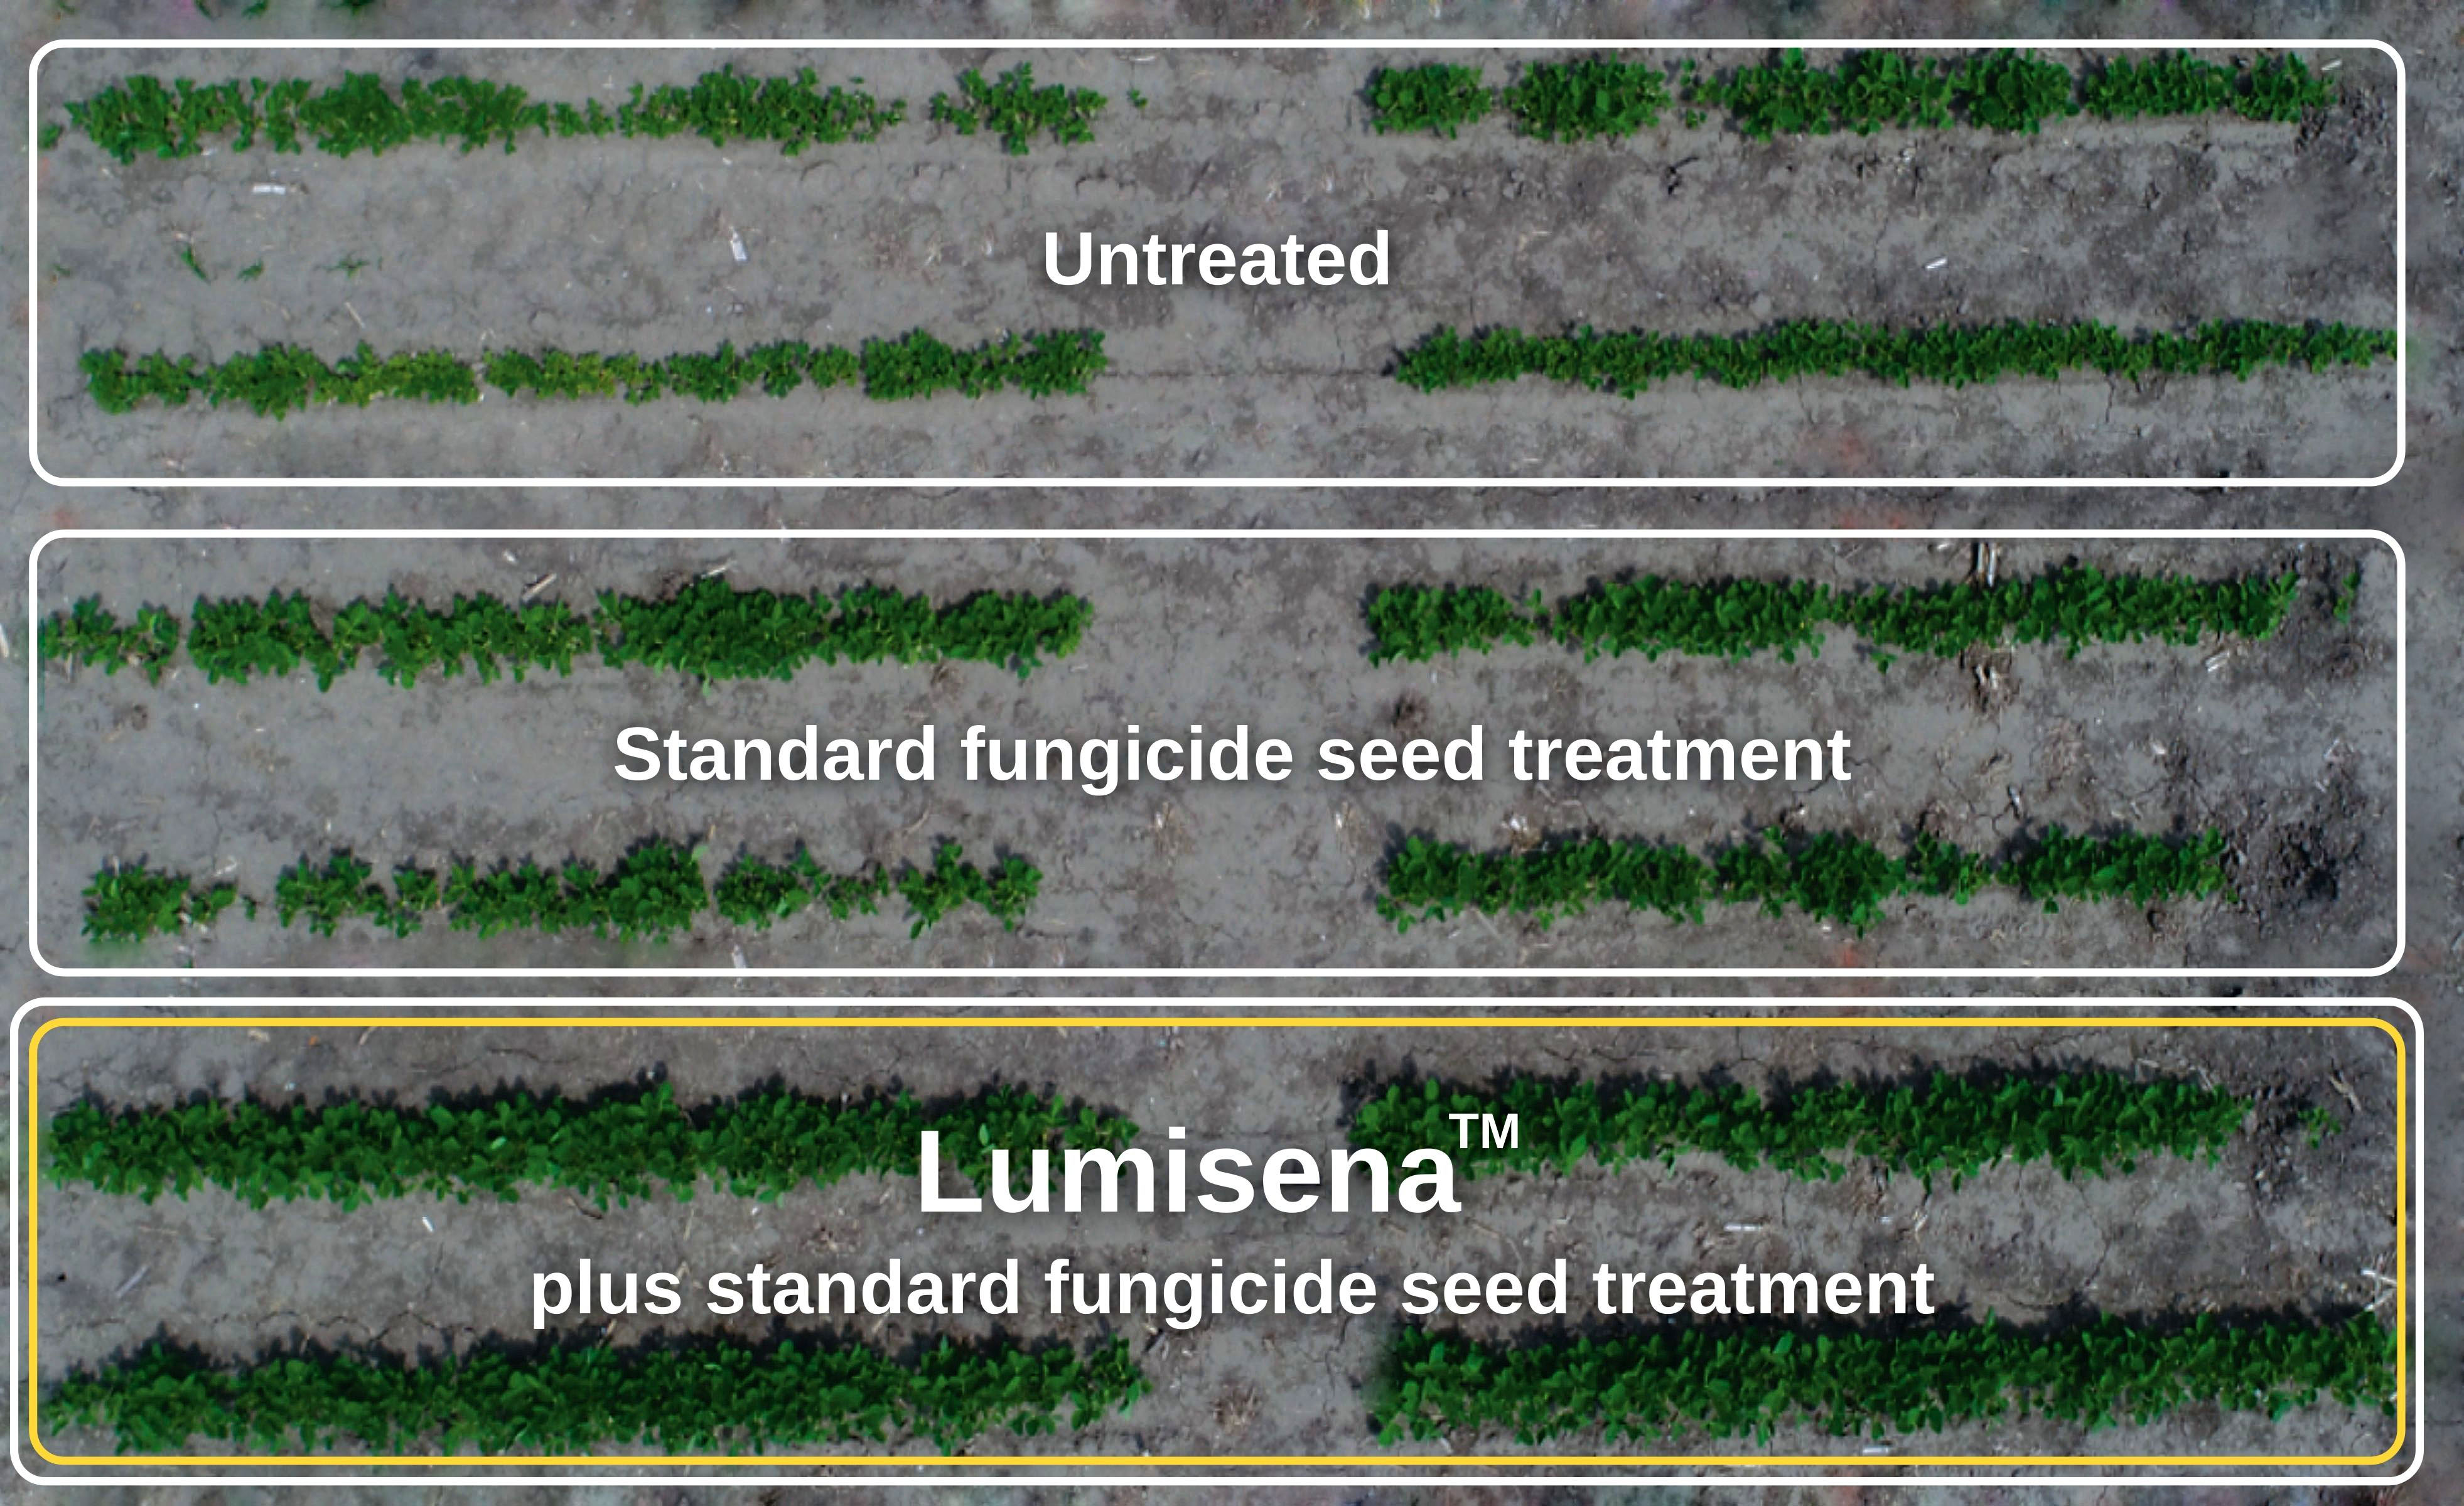 Plot comparisons for untreated, standard treatment and treatment with lumisena